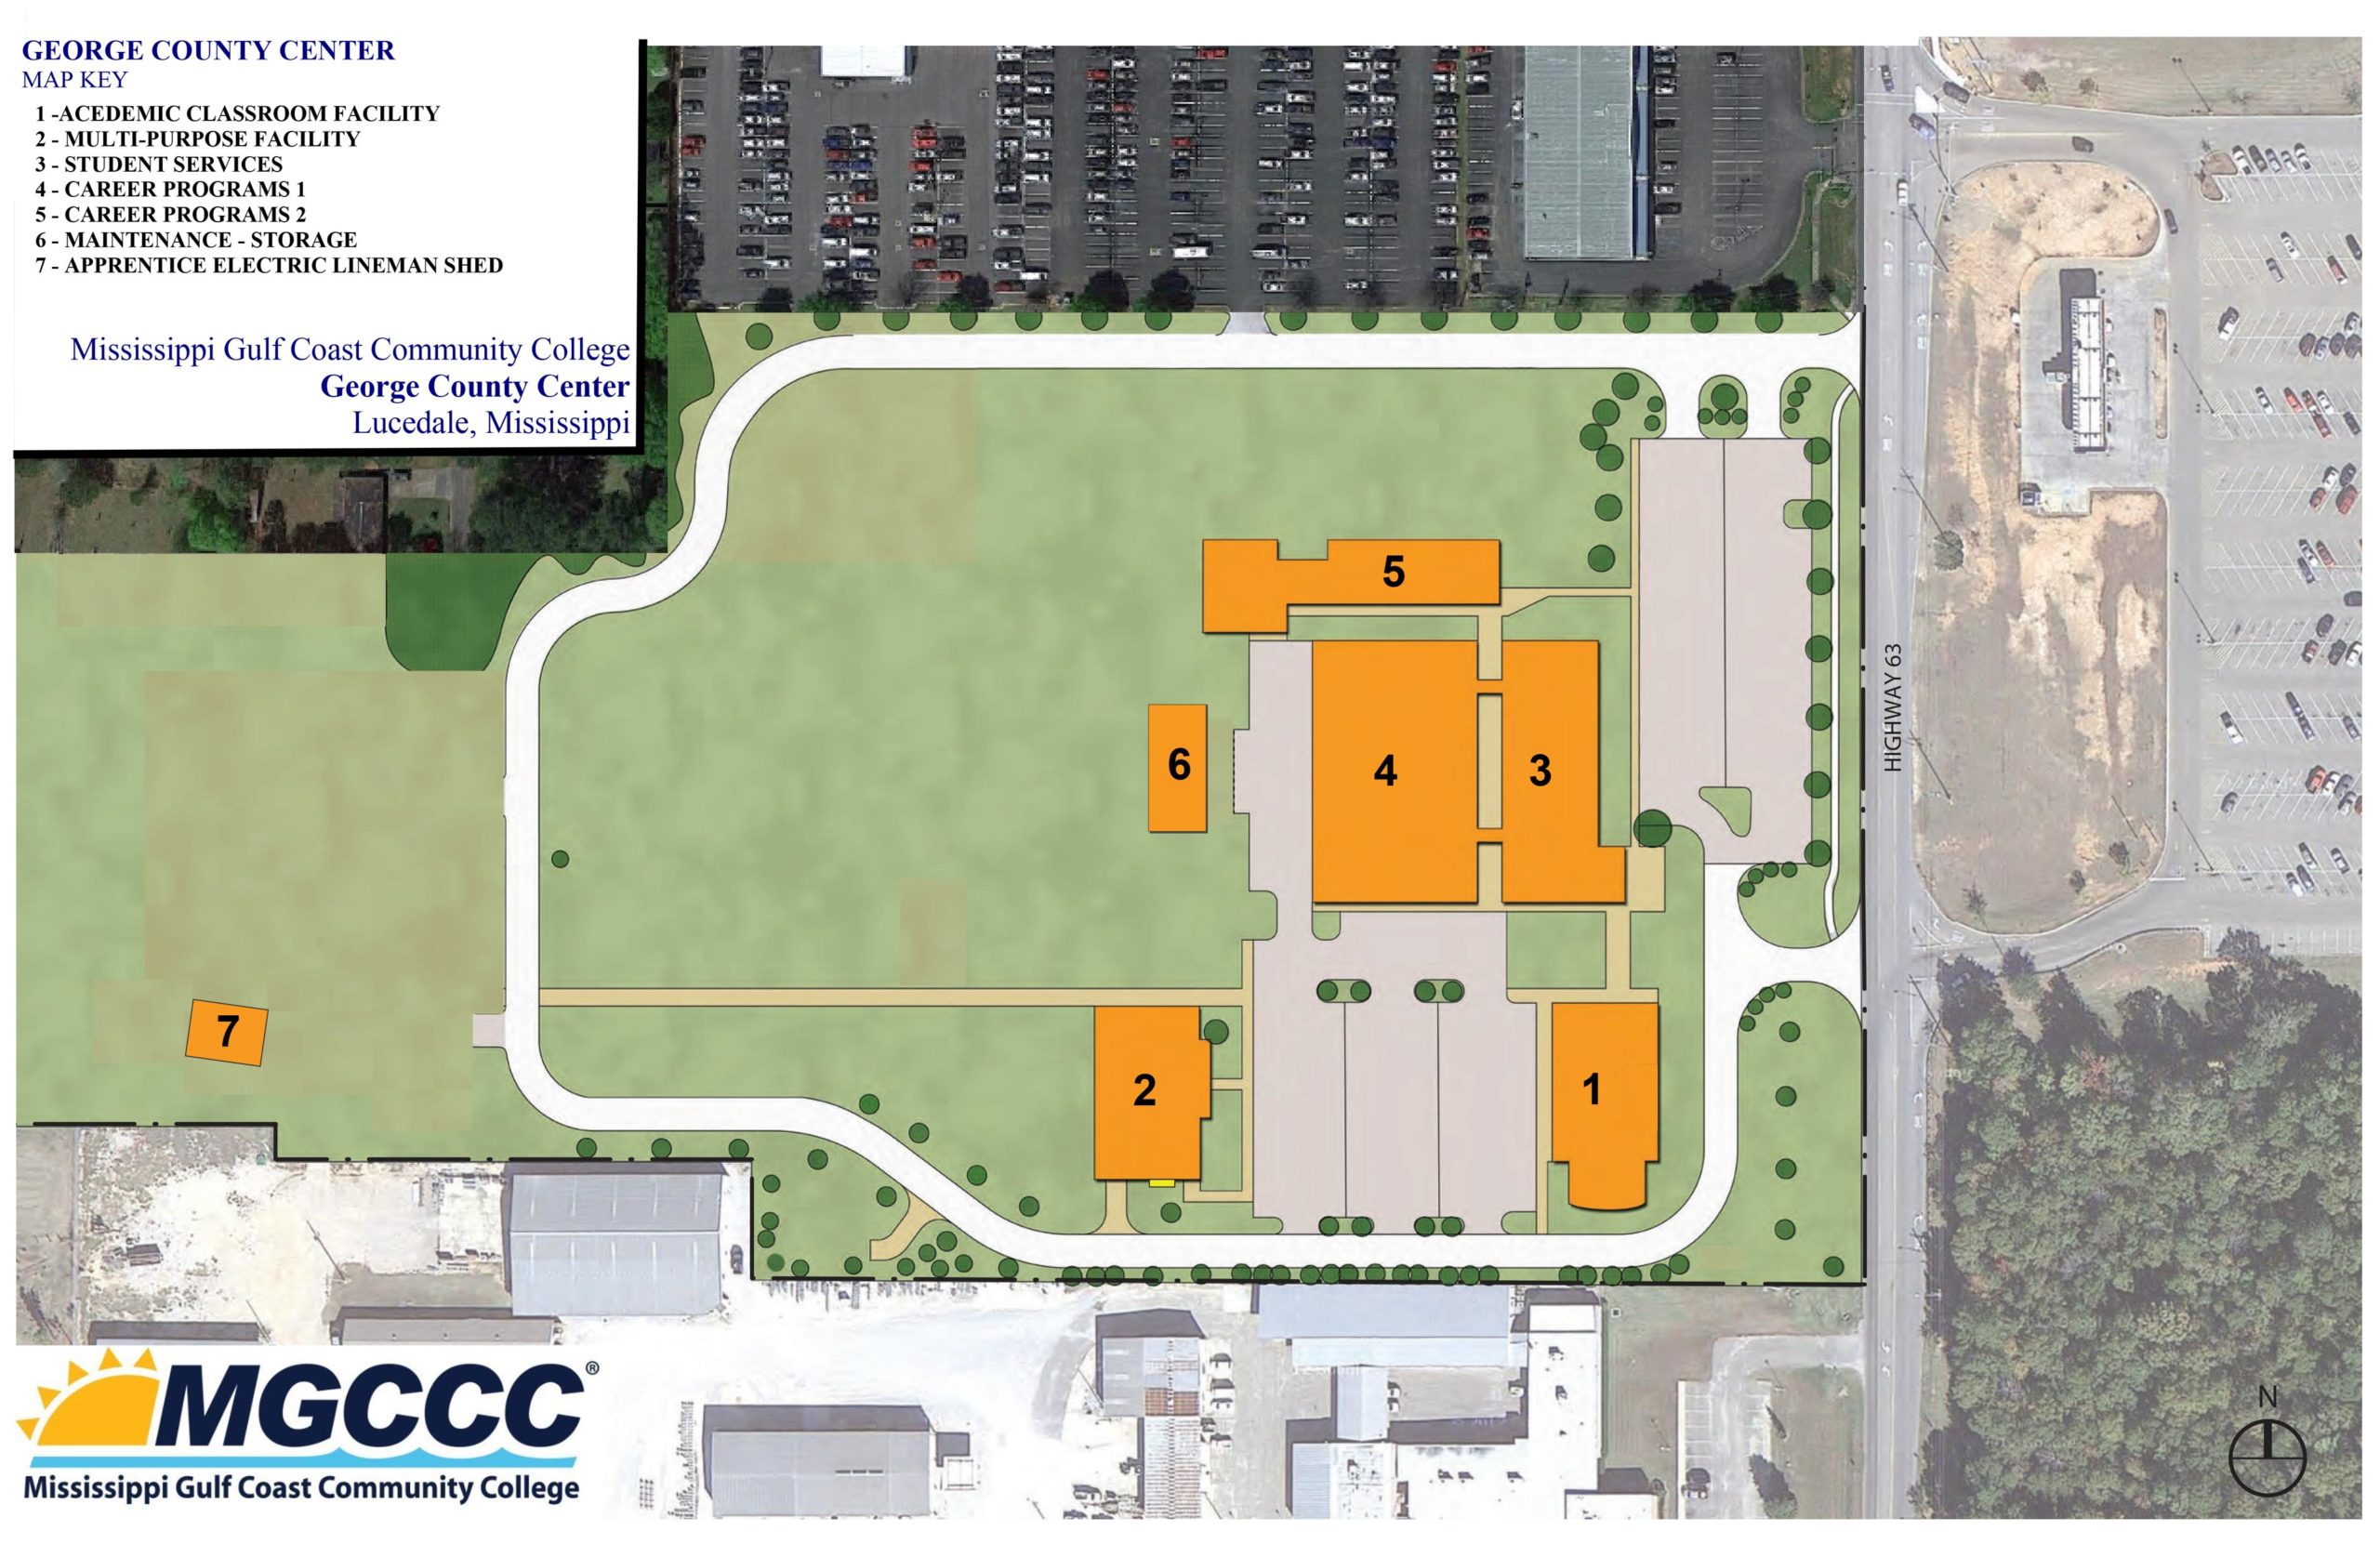 Map of MGCCC's George County Campus.